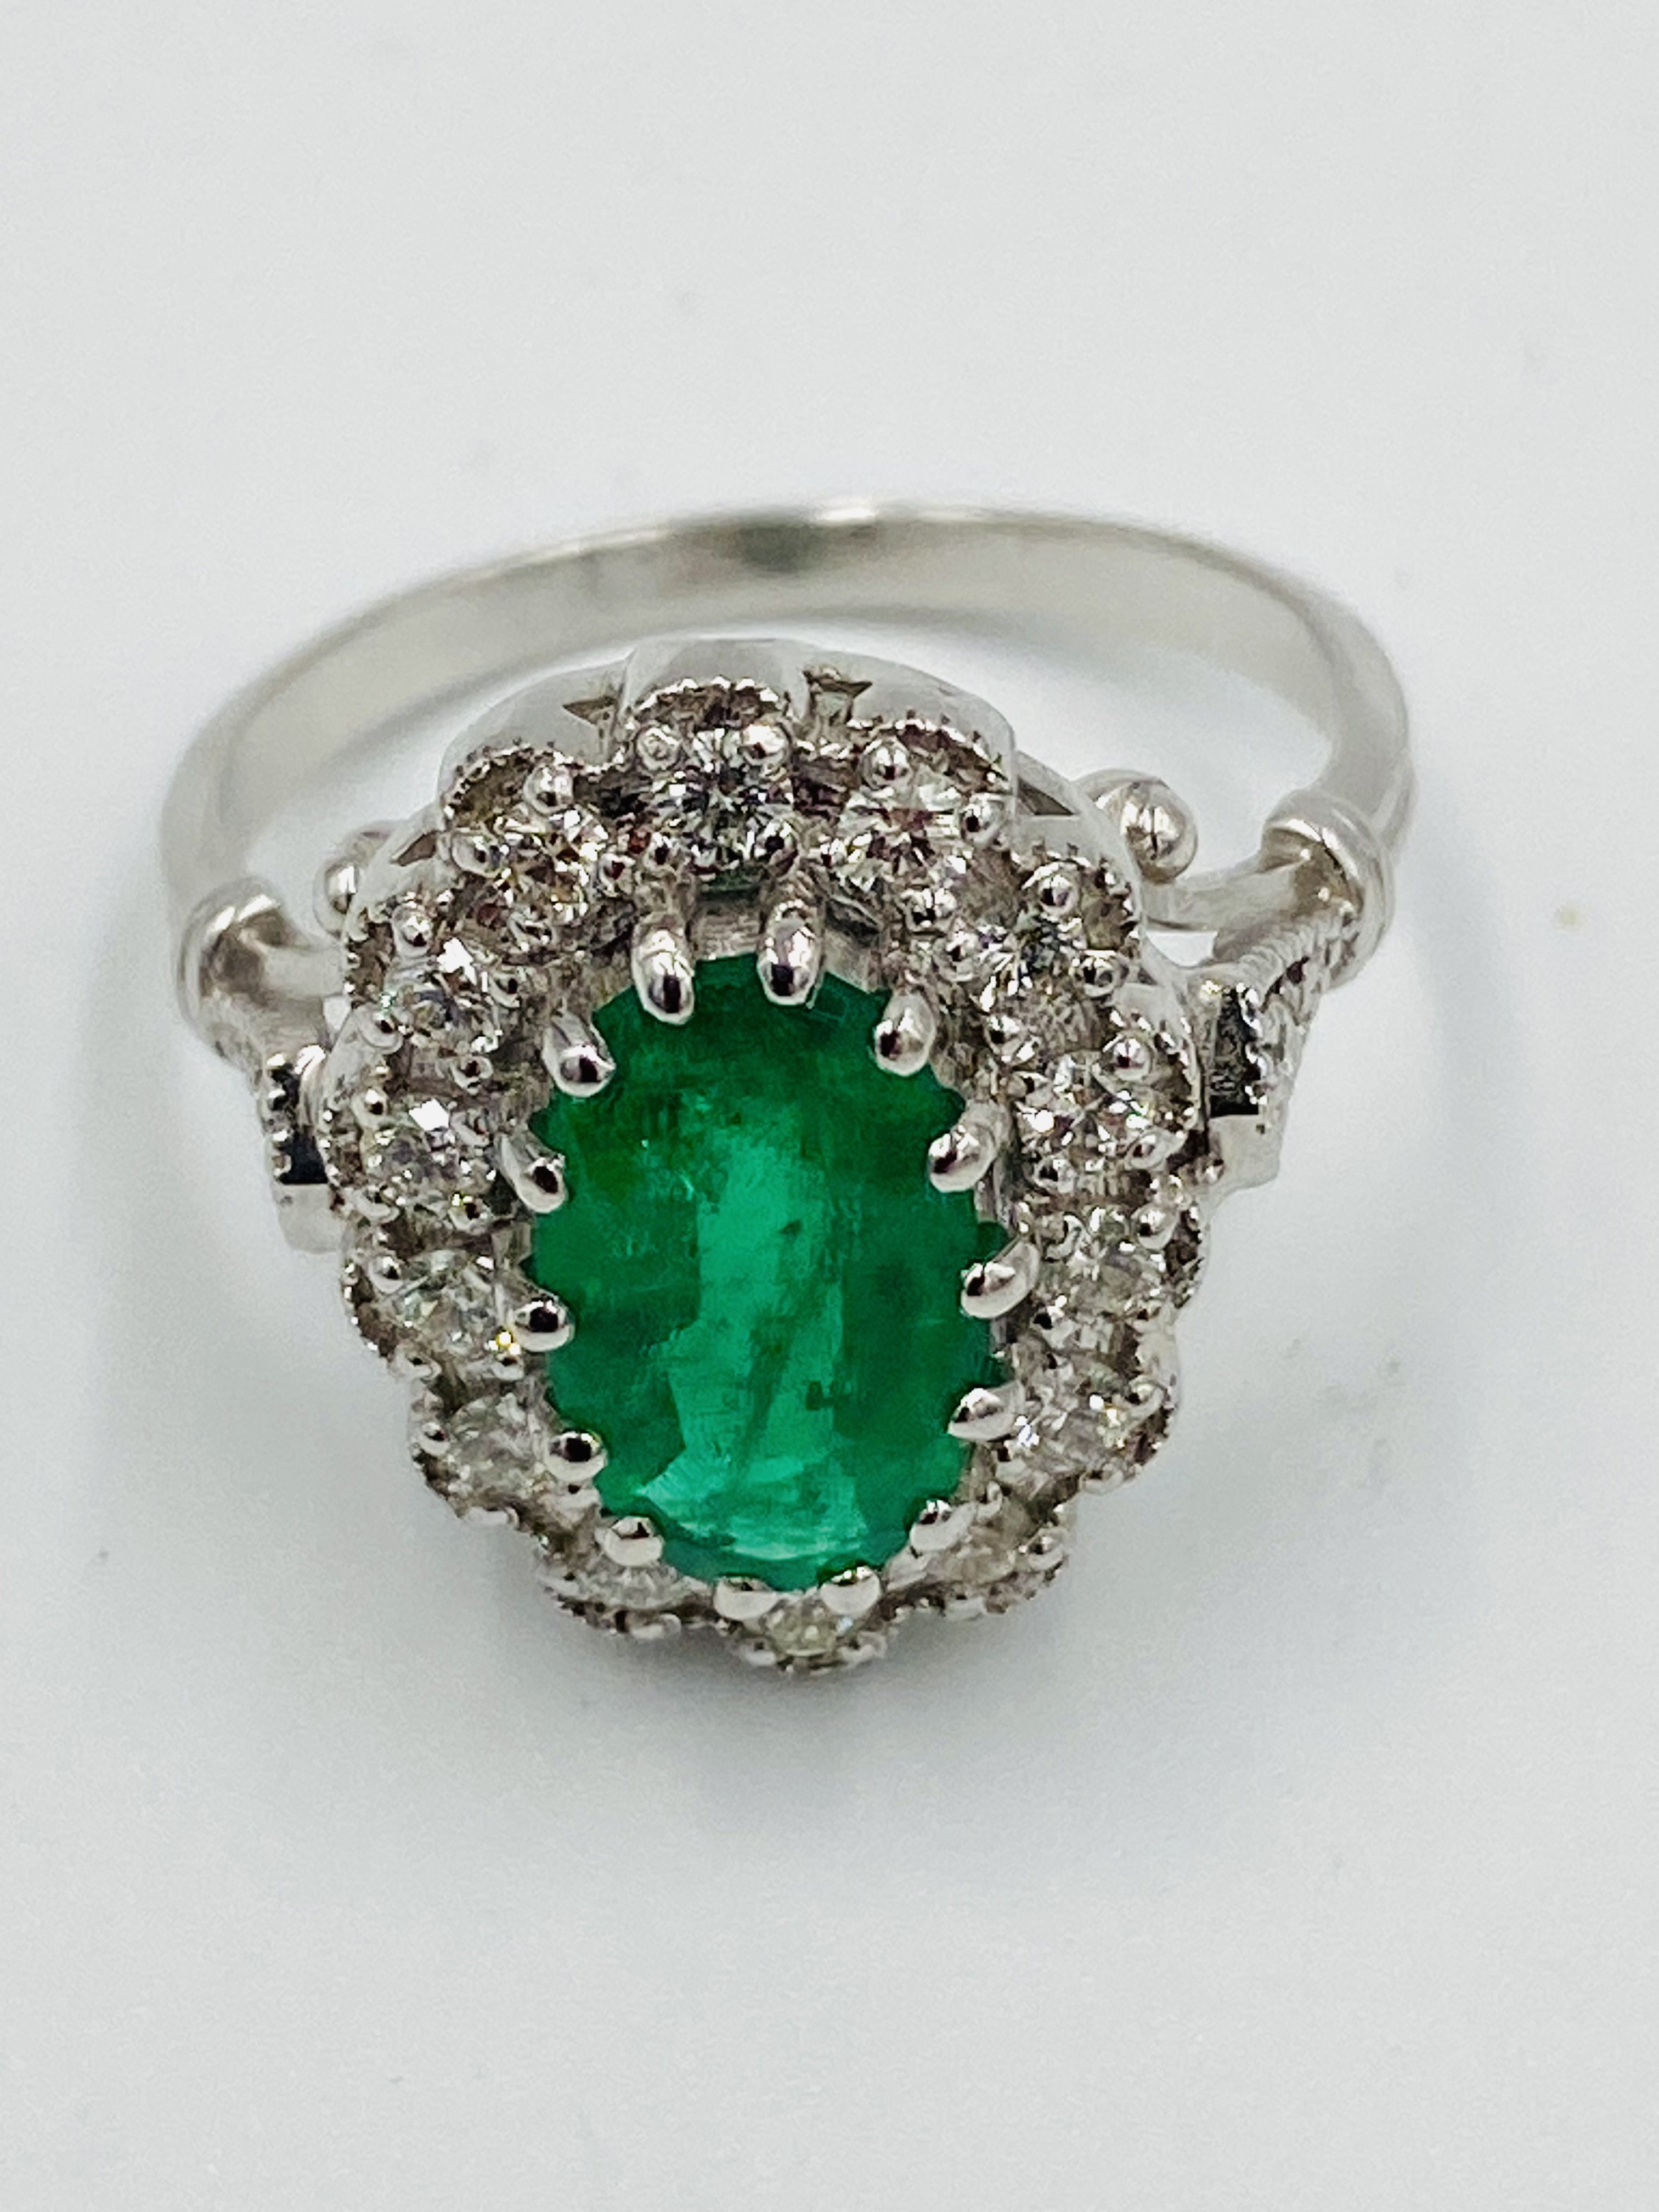 White gold, emerald and diamond ring - Image 5 of 5